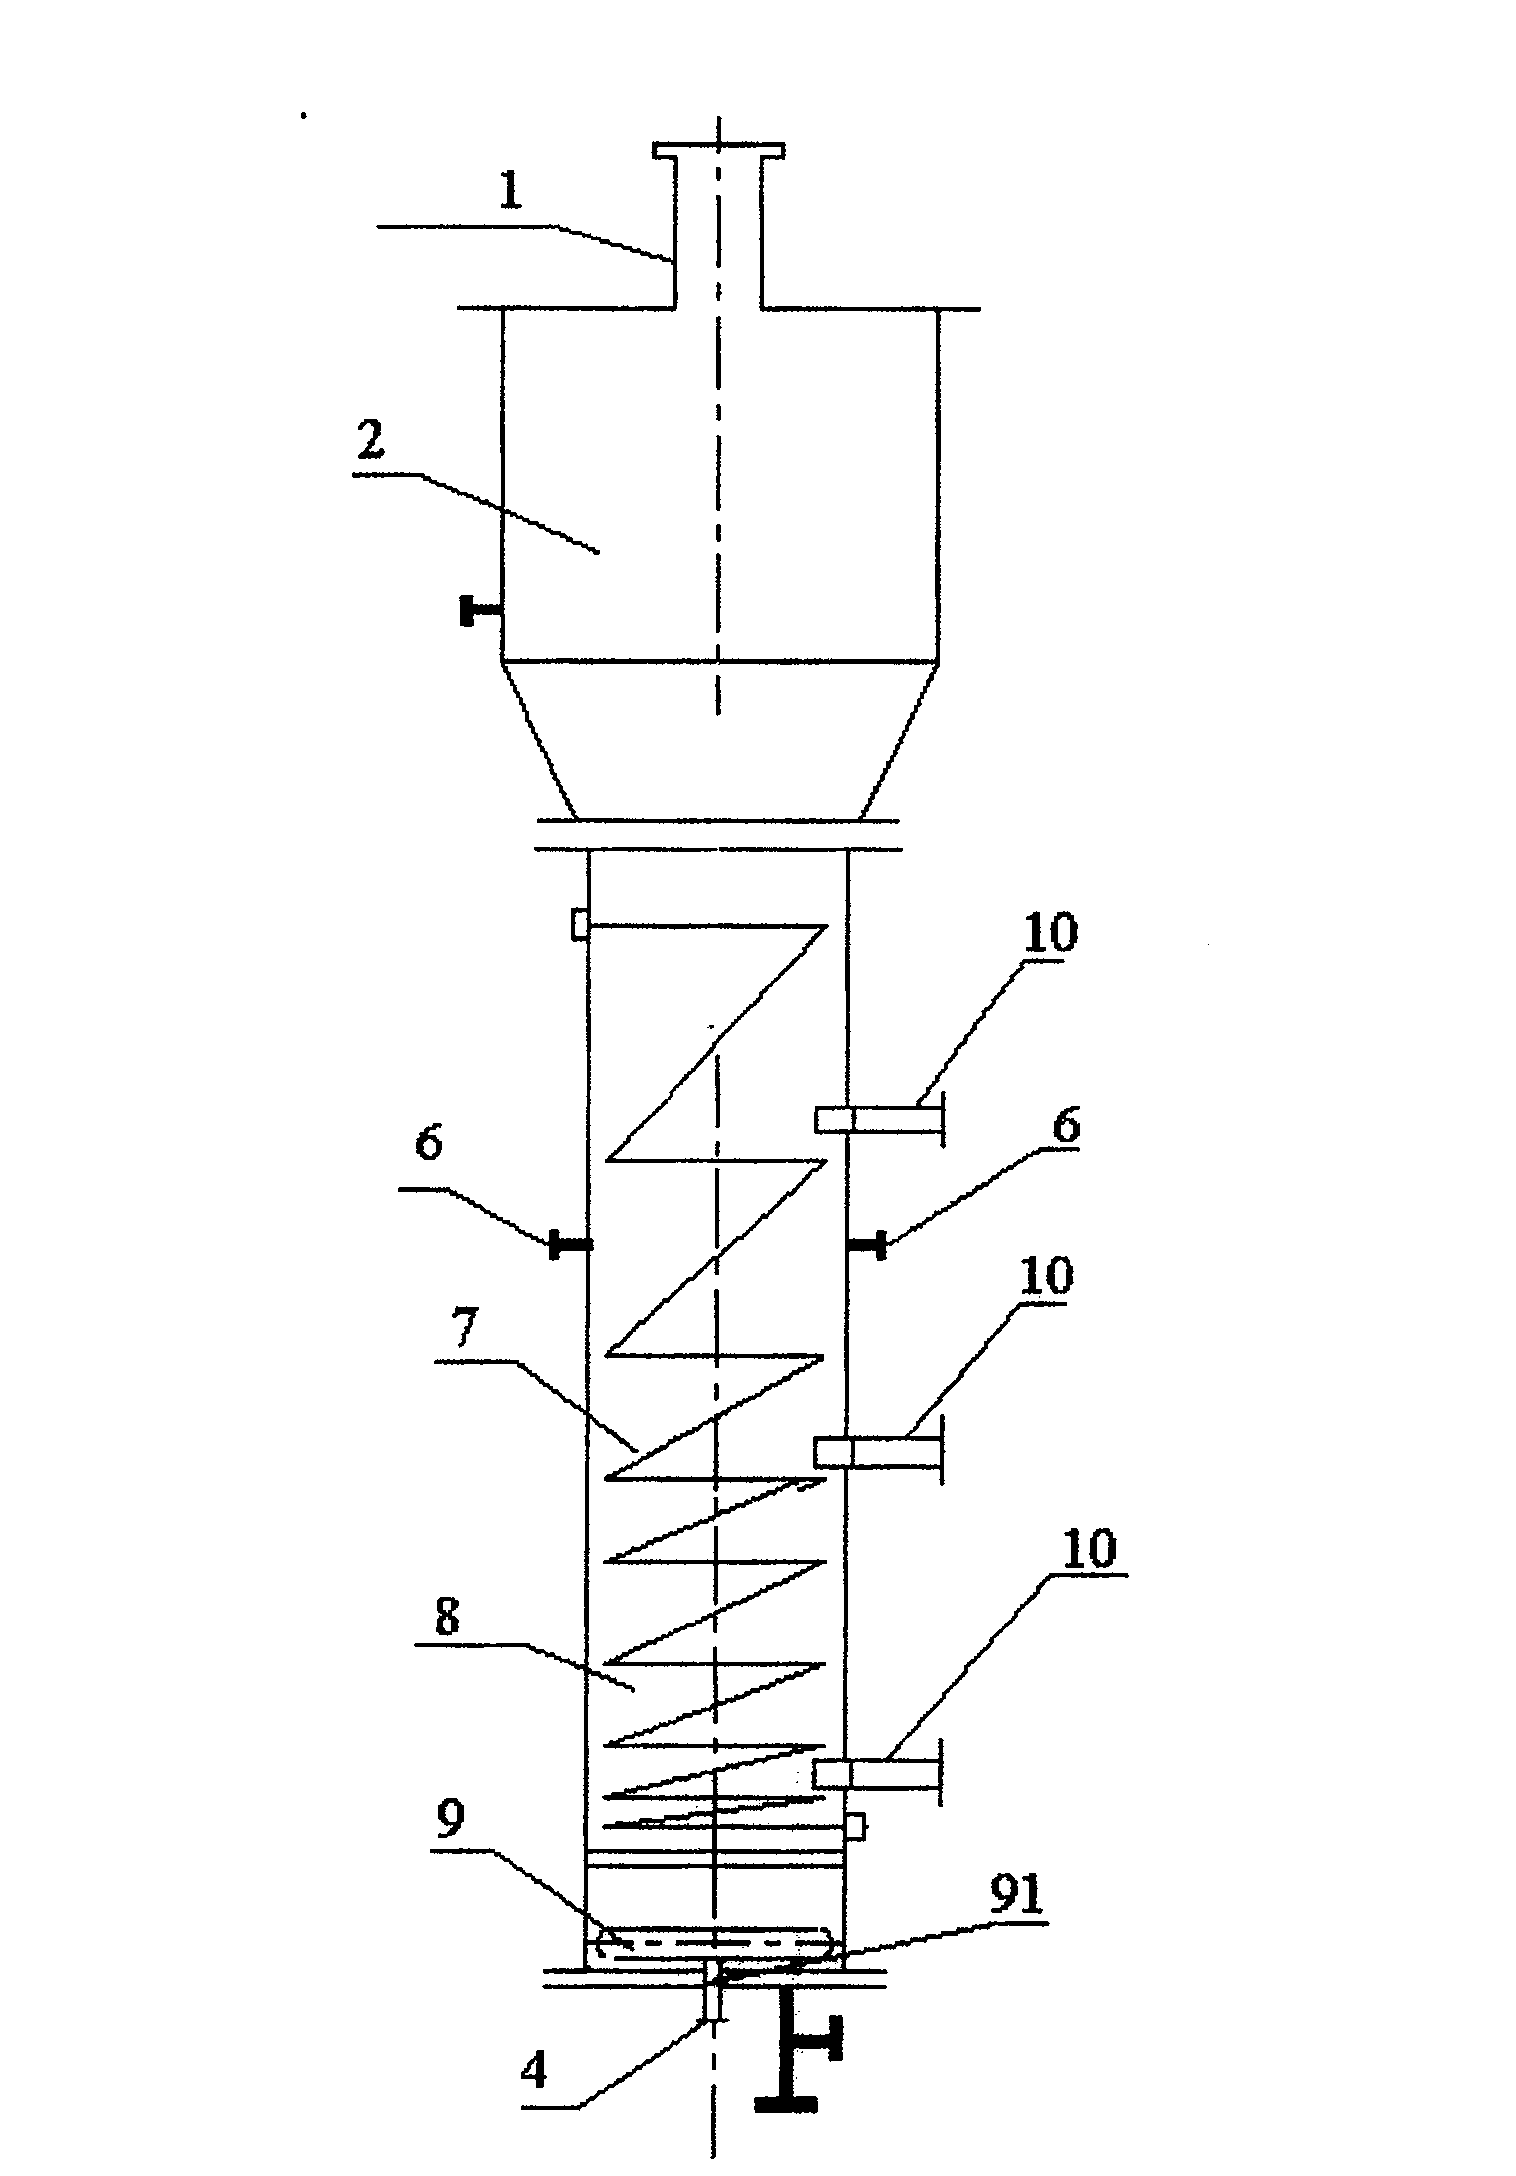 Triphase slurry bed reactor for preparing liquid fuel with synthetic gas